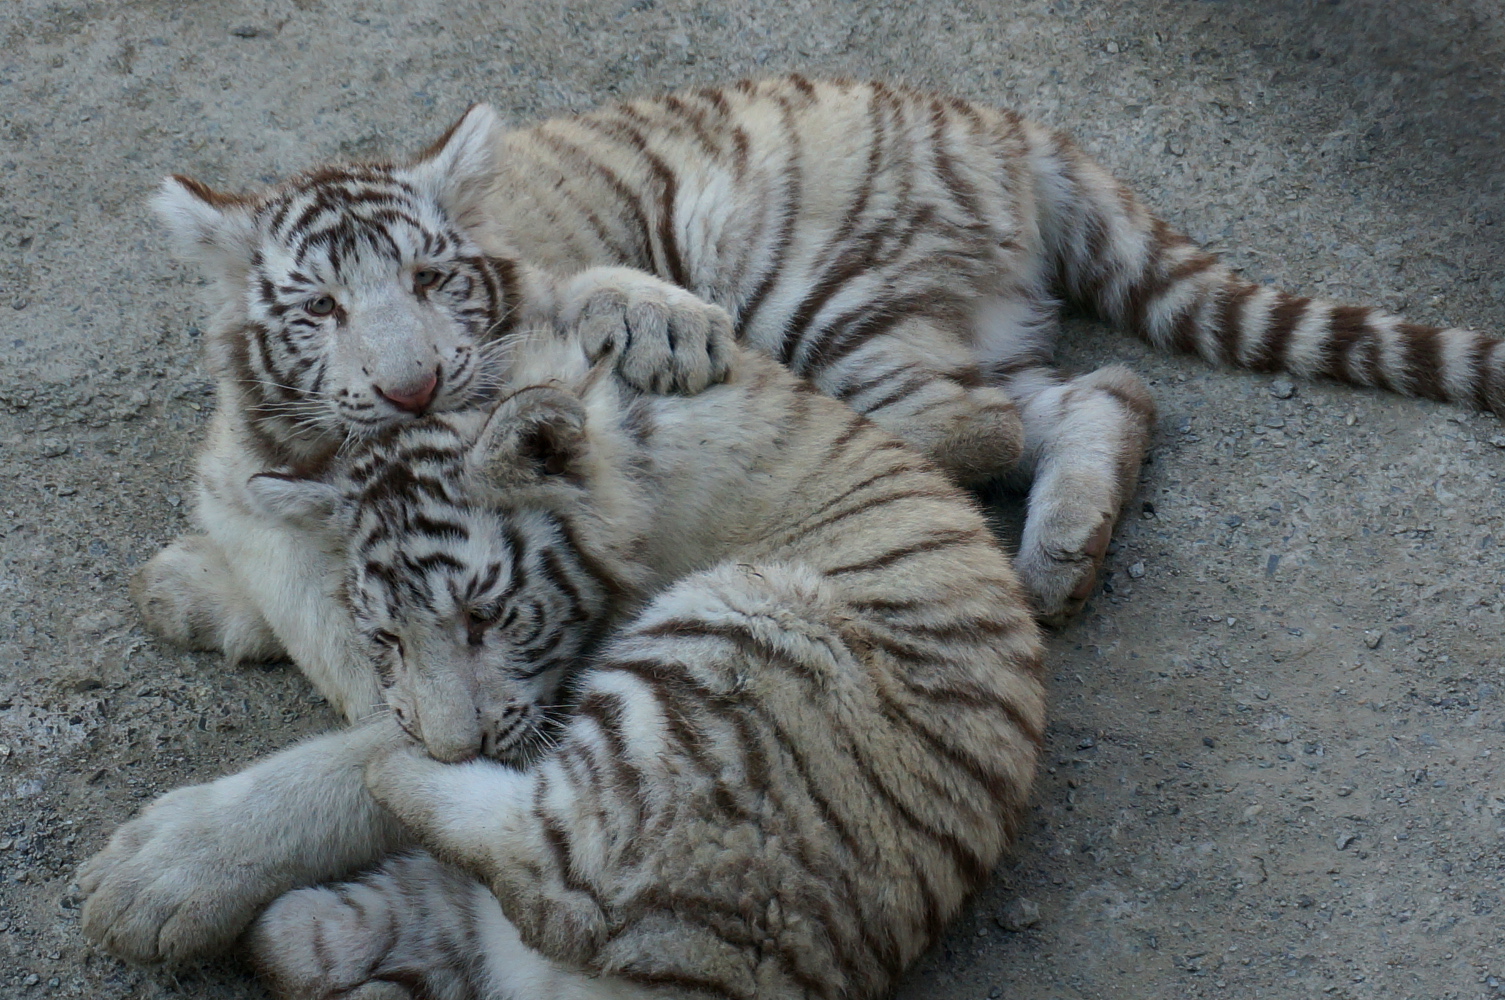 Playful white tiger cubs at the Siberian Tiger Park. Image by Anita Isalska / Lonely Planet